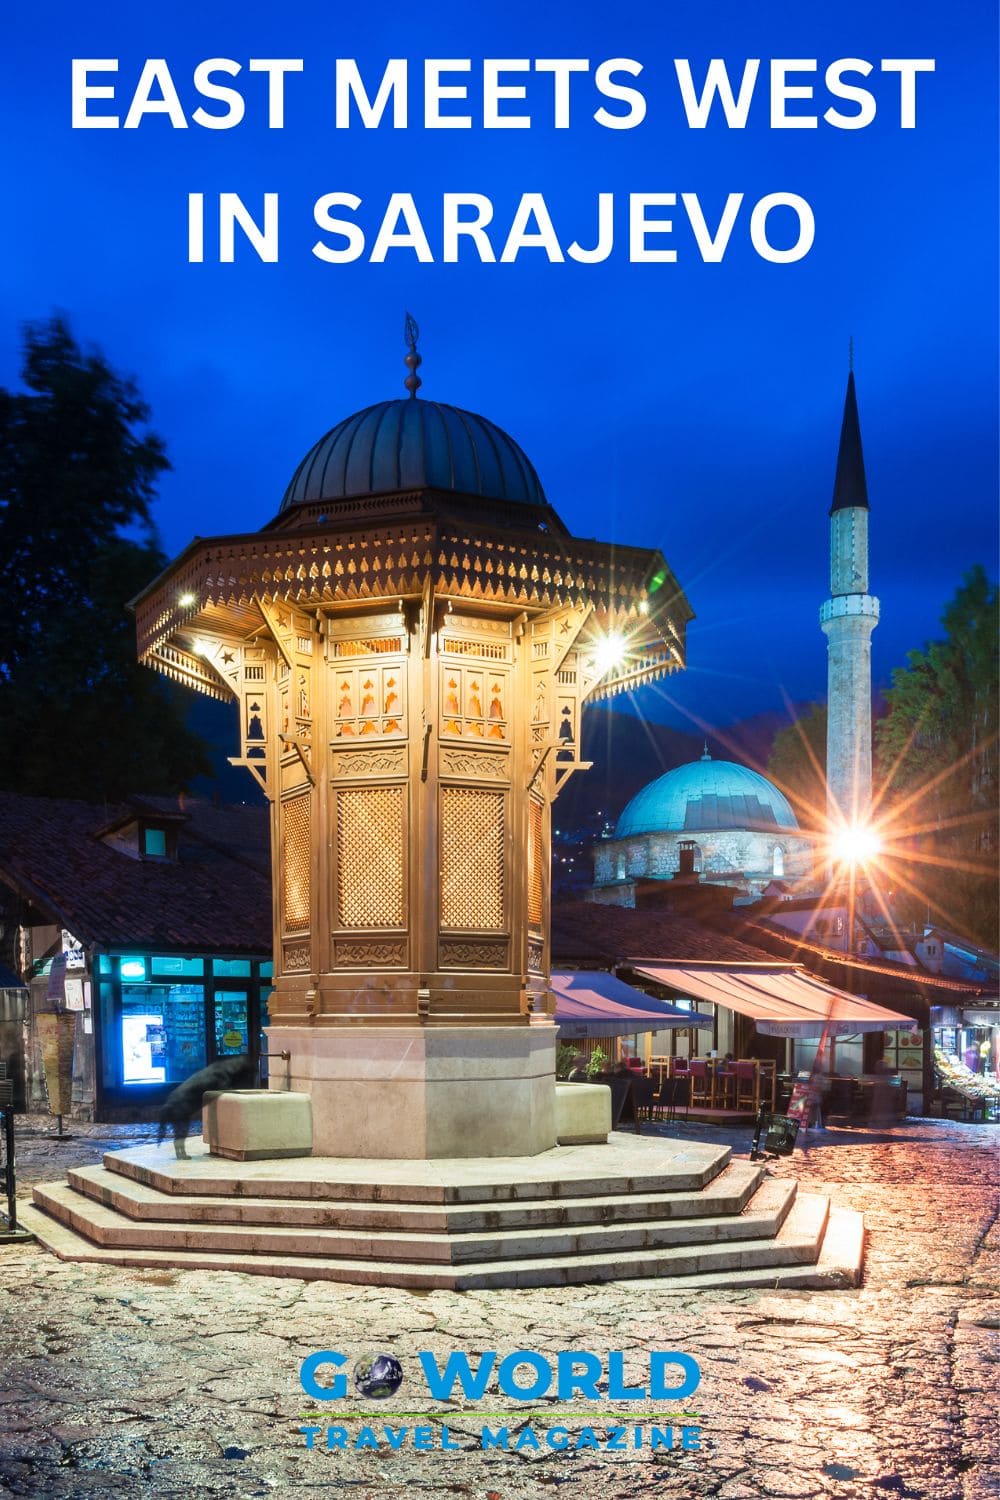 Sometimes called "The Jerusalem of Europe", Sarajevo provides a unique experience merging East and West cultures, architecture and traditions. #sarajevo #bosnia